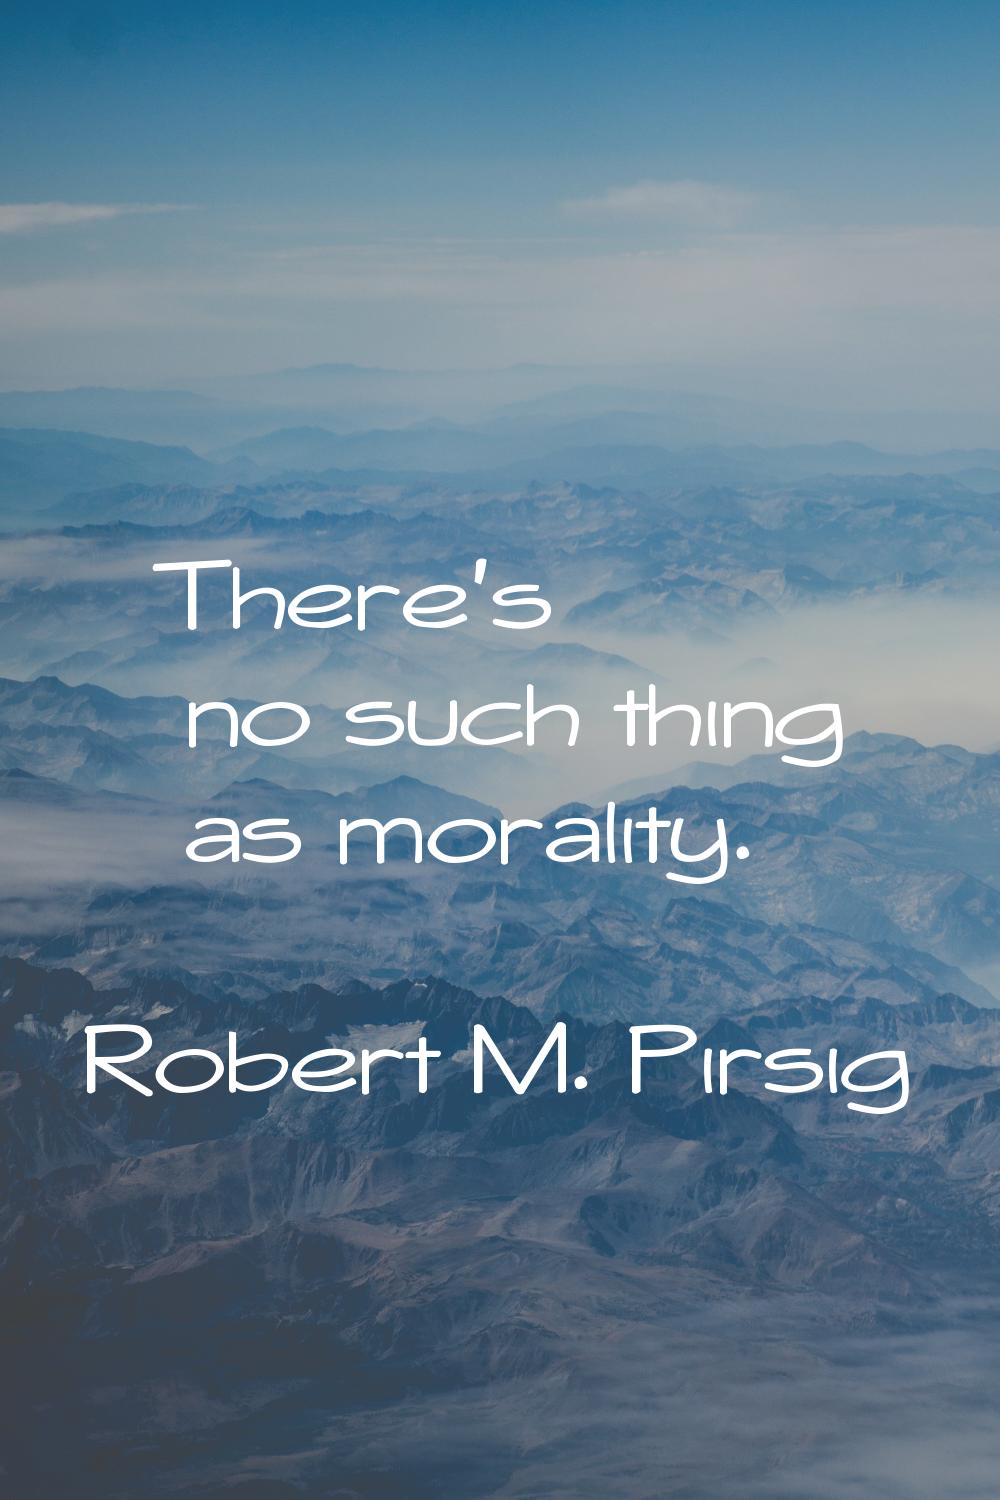 There's no such thing as morality.